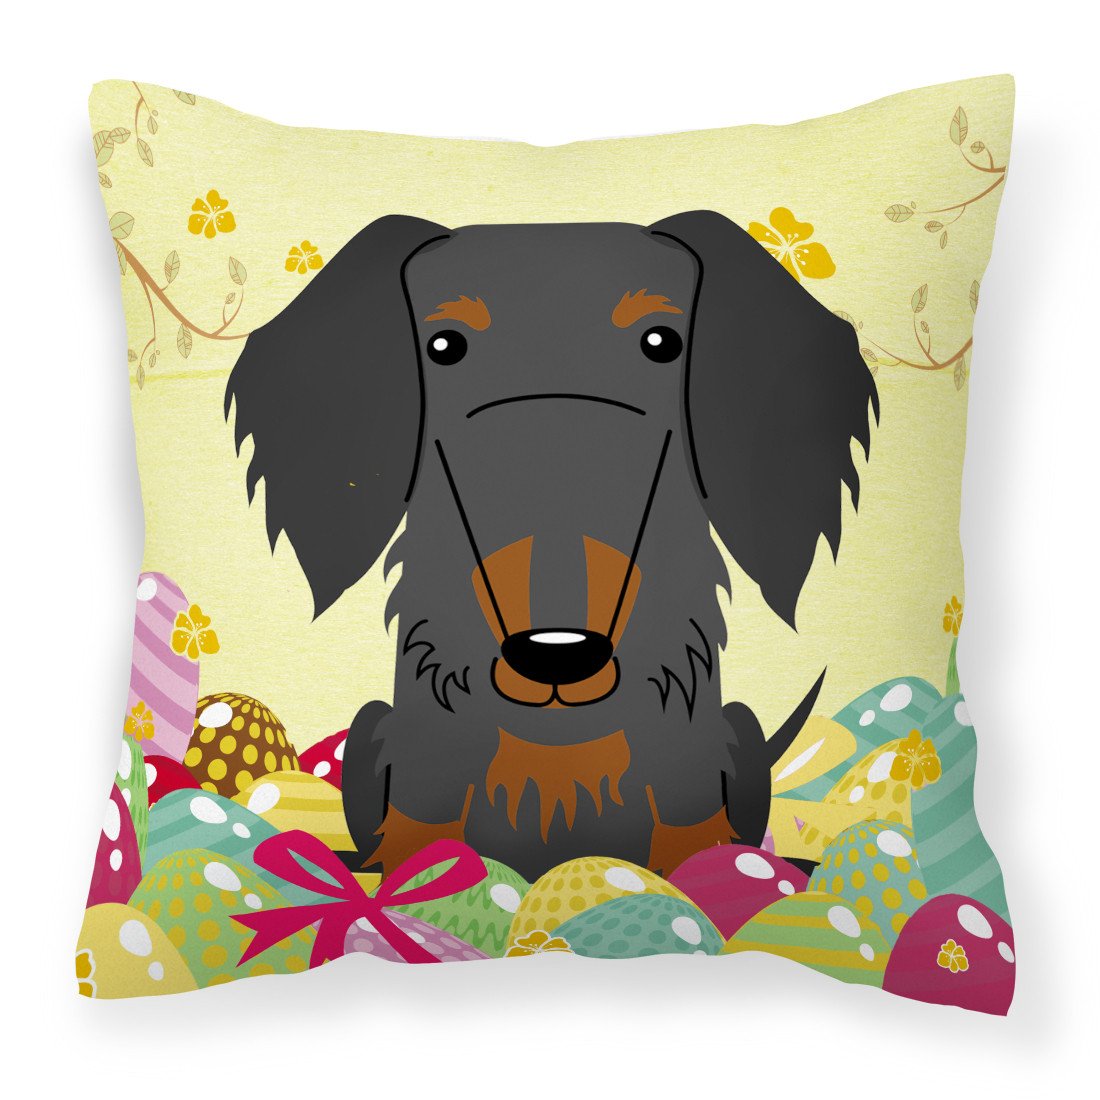 Easter Eggs Wire Haired Dachshund Black Tan Fabric Decorative Pillow BB6127PW1818 by Caroline's Treasures